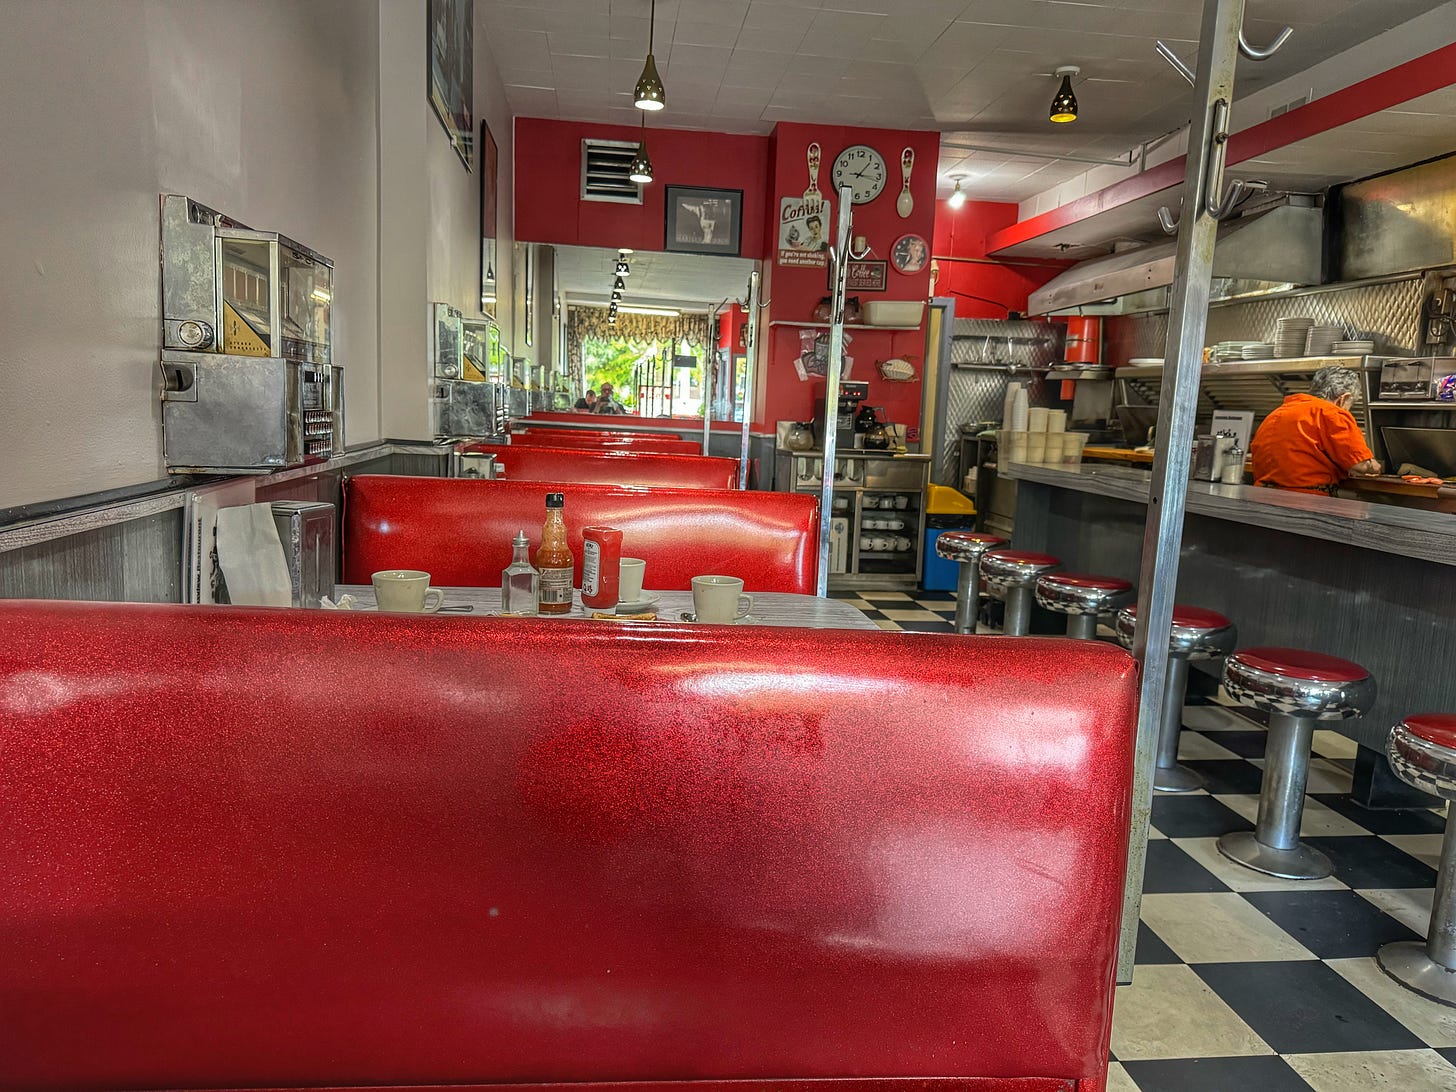 The interior of the Downsview Restaurant, as seen from one of the red sparkly booths along one wall. In the background, Betty the server is helping to prepare food.